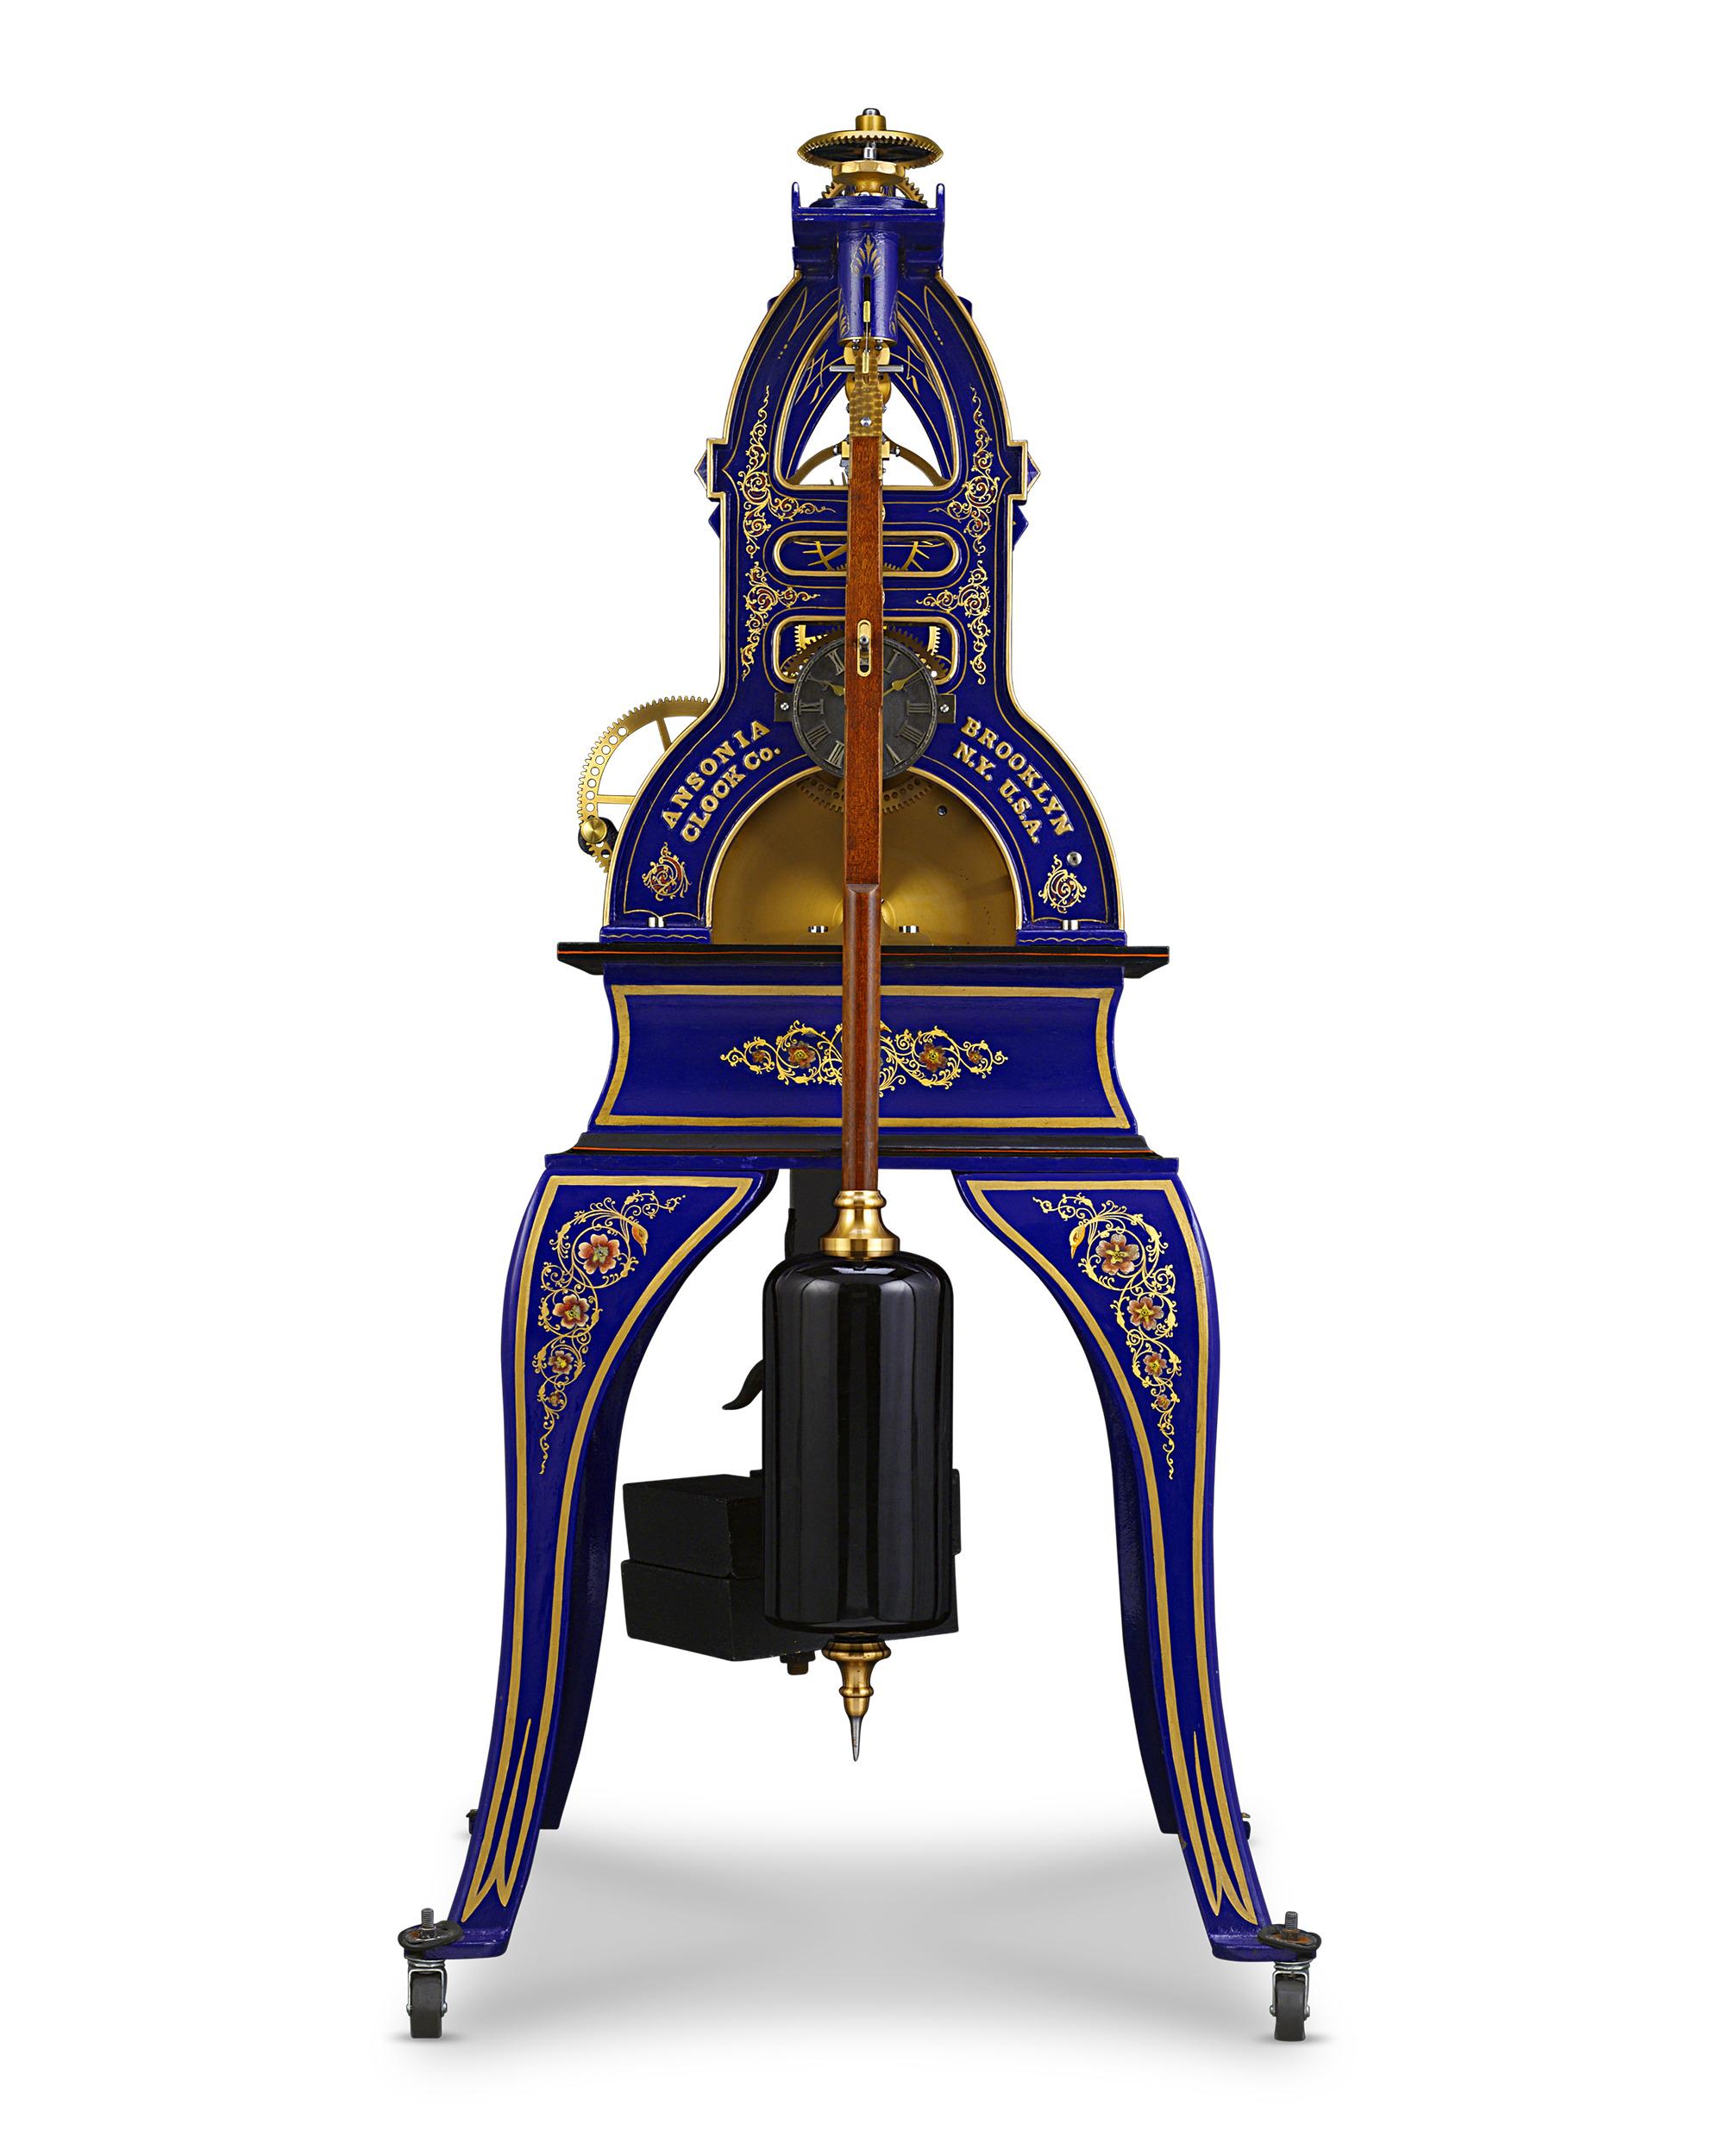 This remarkable 1895 illumination regulator tower clock is an incredibly rare masterpiece. This clock is one of only a few four-train tower clocks ever produced by the esteemed Ansonia Clock Company. Beautifully preserved, this spectacular tower